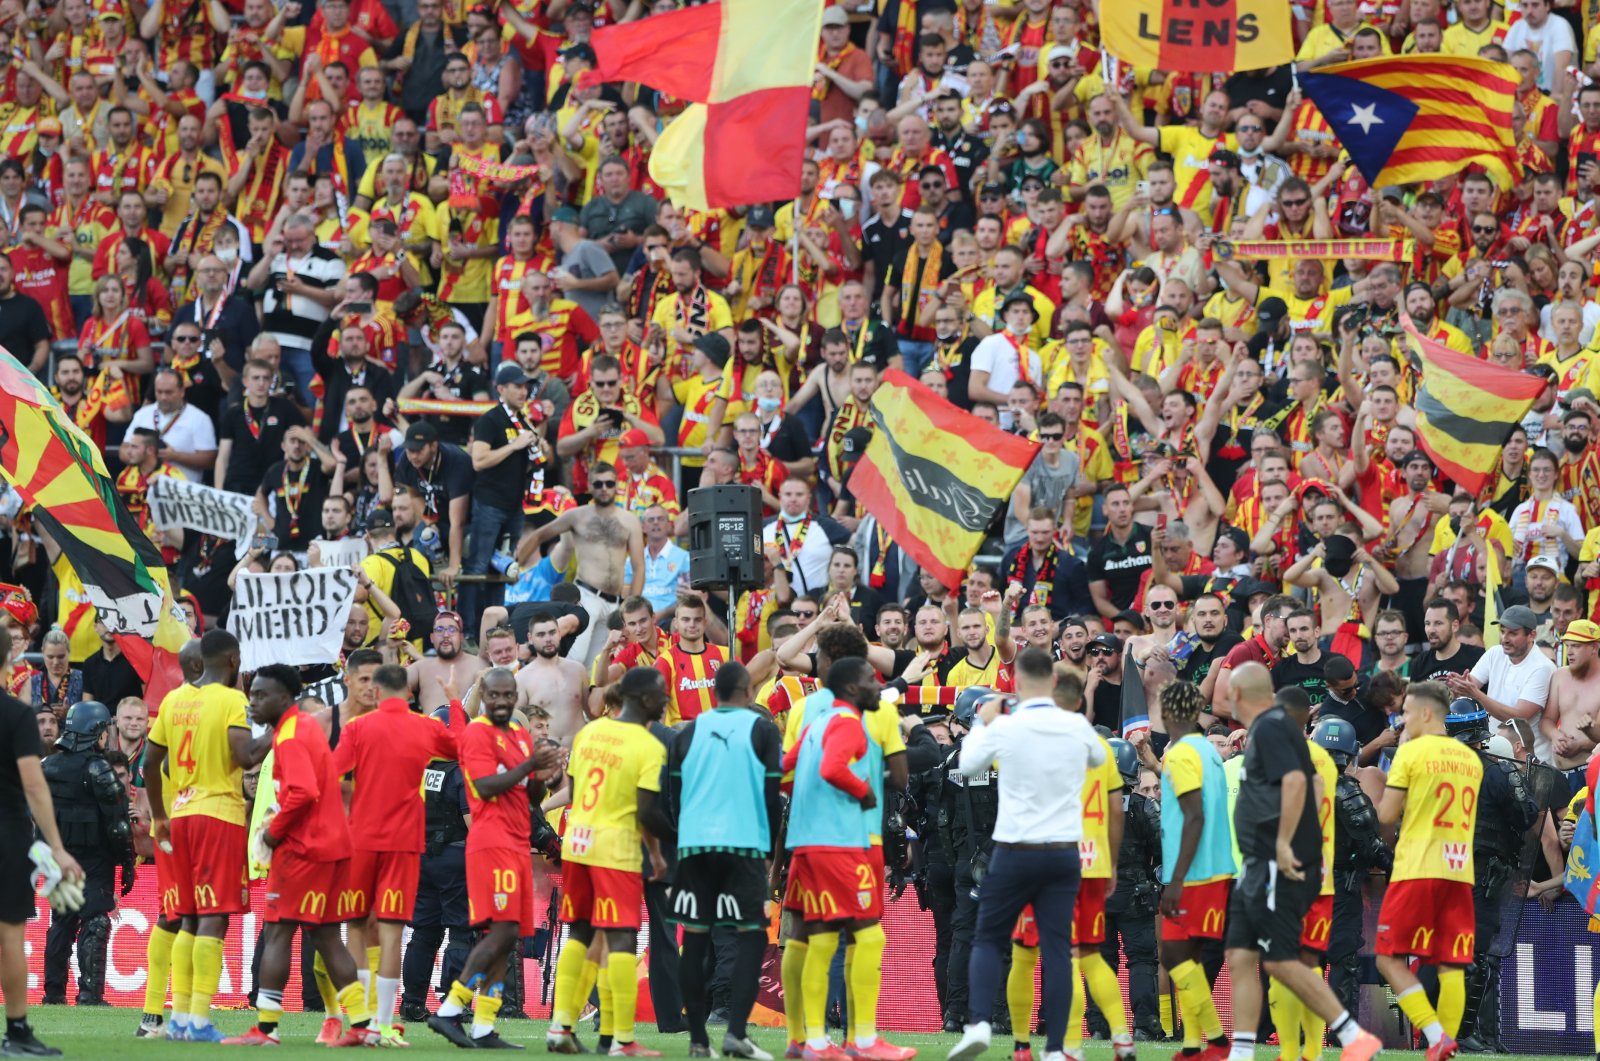 RC Lens players celebrate after the French Ligue 1 victory over Lille at the Stade Bollaert-Delelis in Lens, France, Sept. 18, 2021. (Reuters Photo)